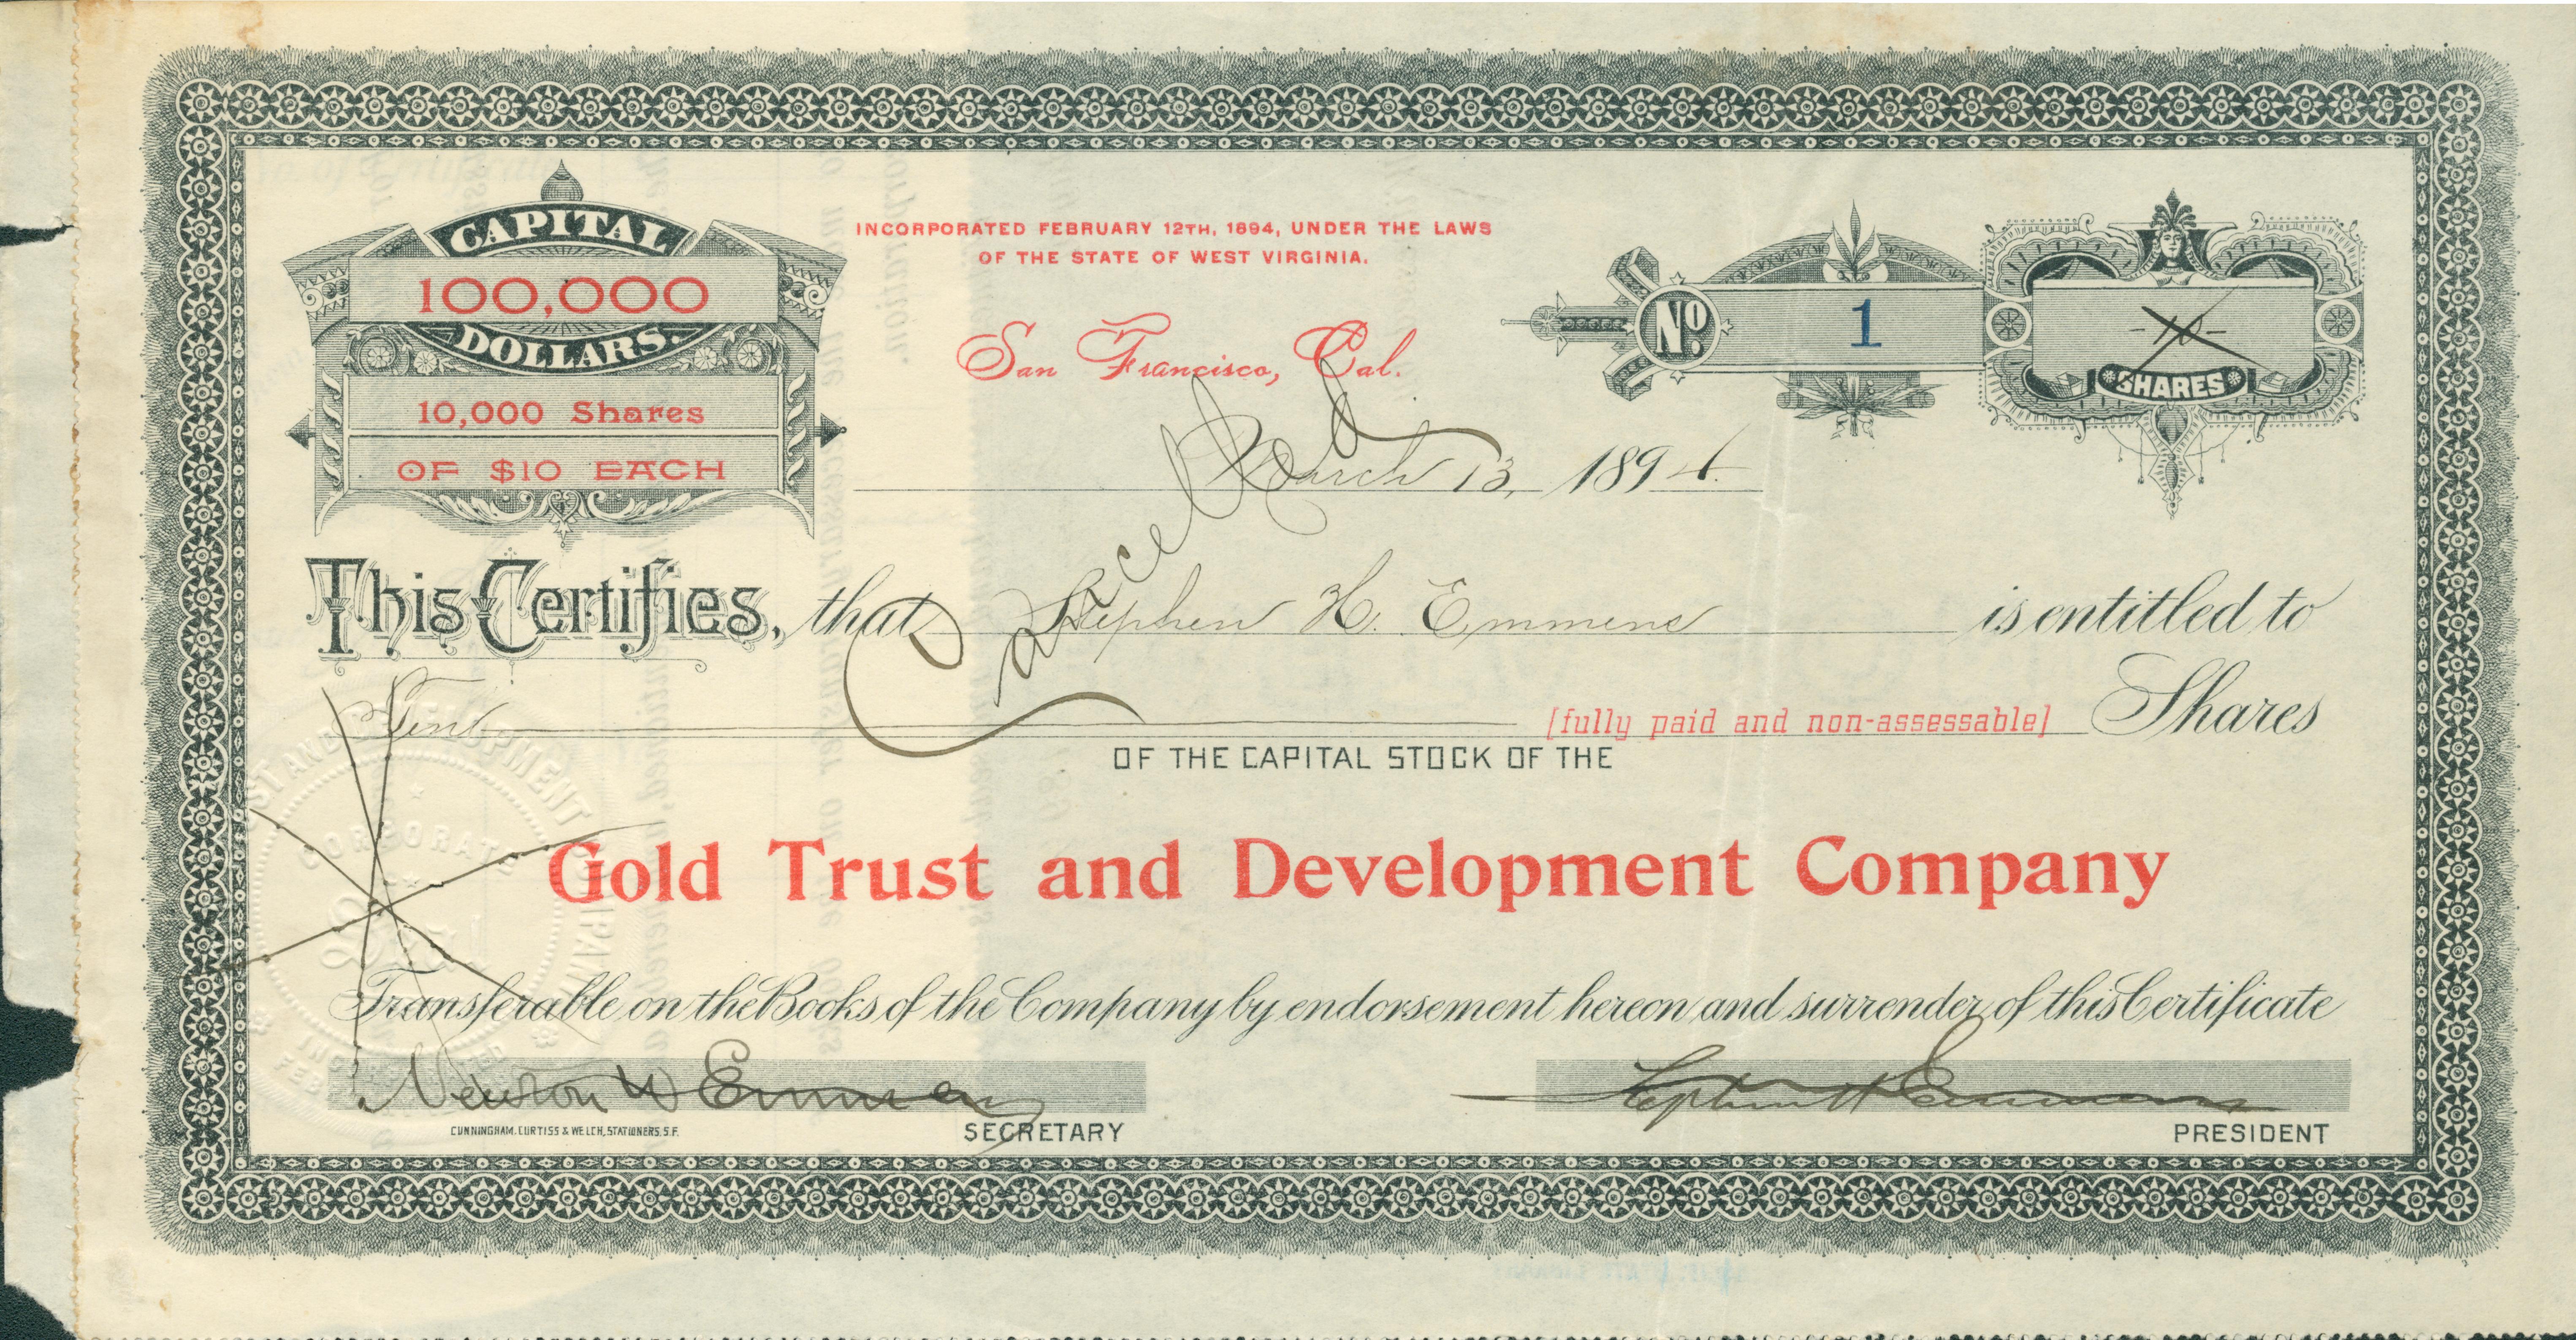 Certificate No. 1 for 10,000 shares of $10 each to Stephen H. Emmens. Shows handwritten 